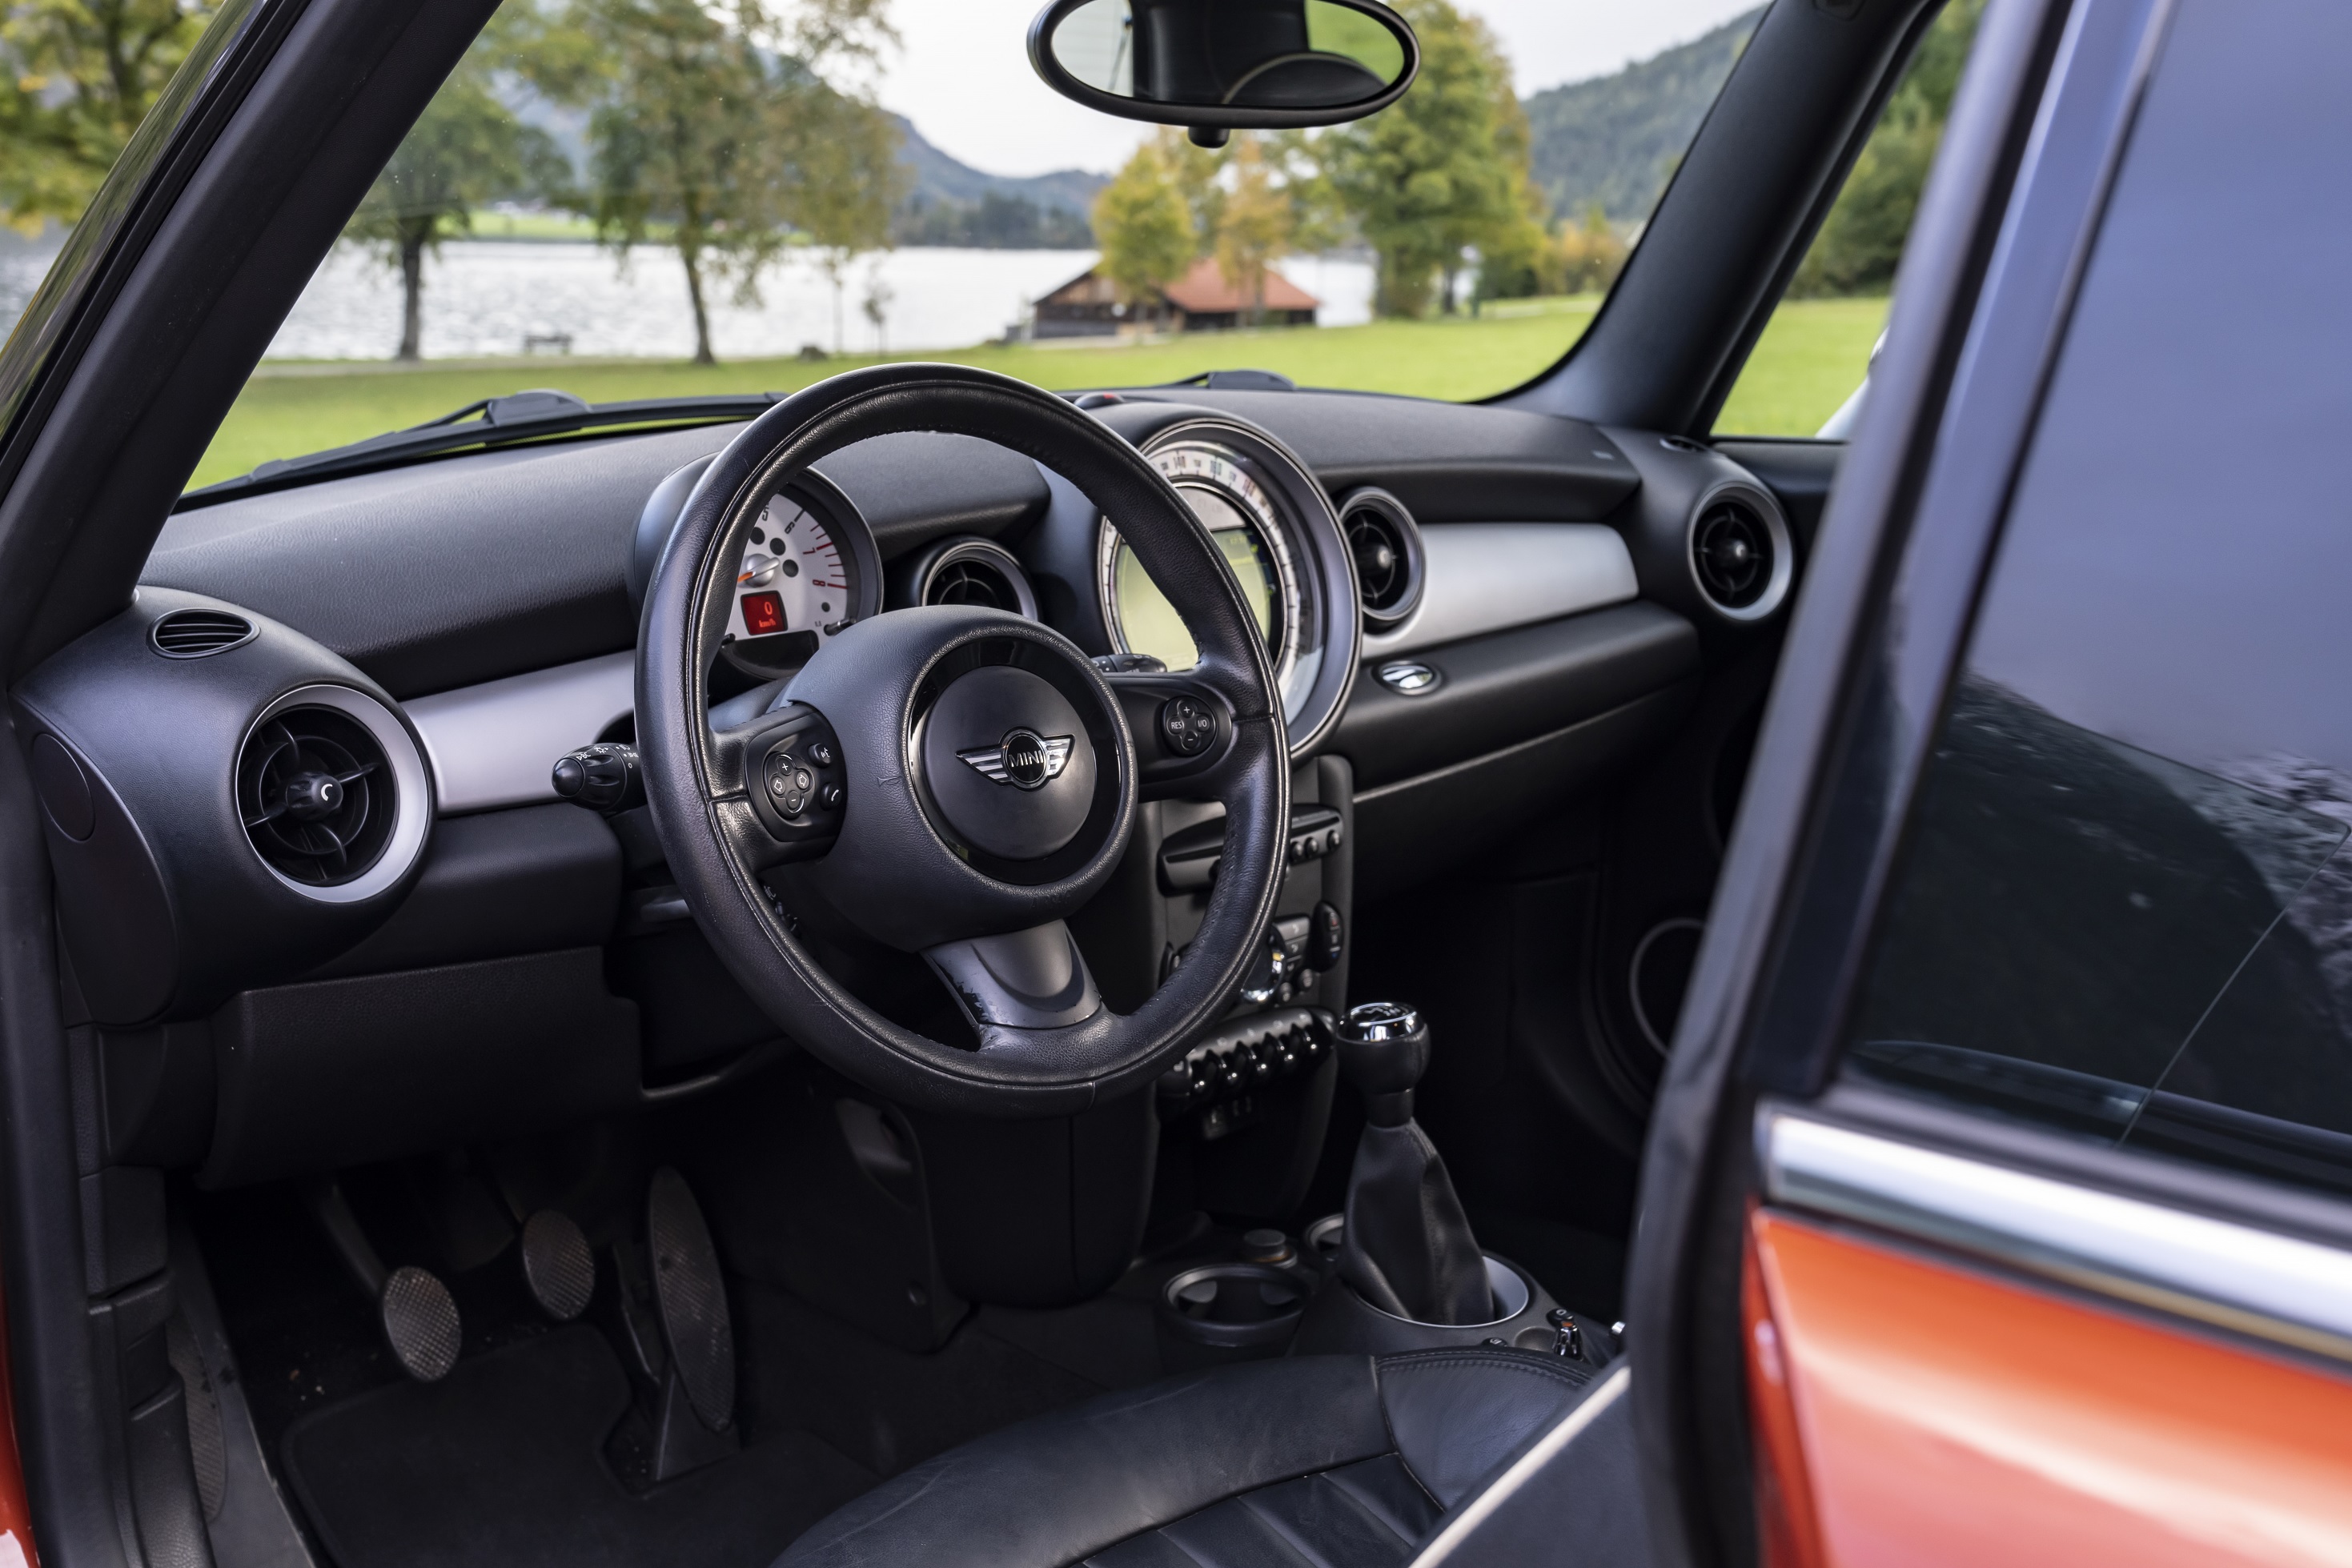 The black-and-silver dashboard of an orange post-update R56 Mini Cooper